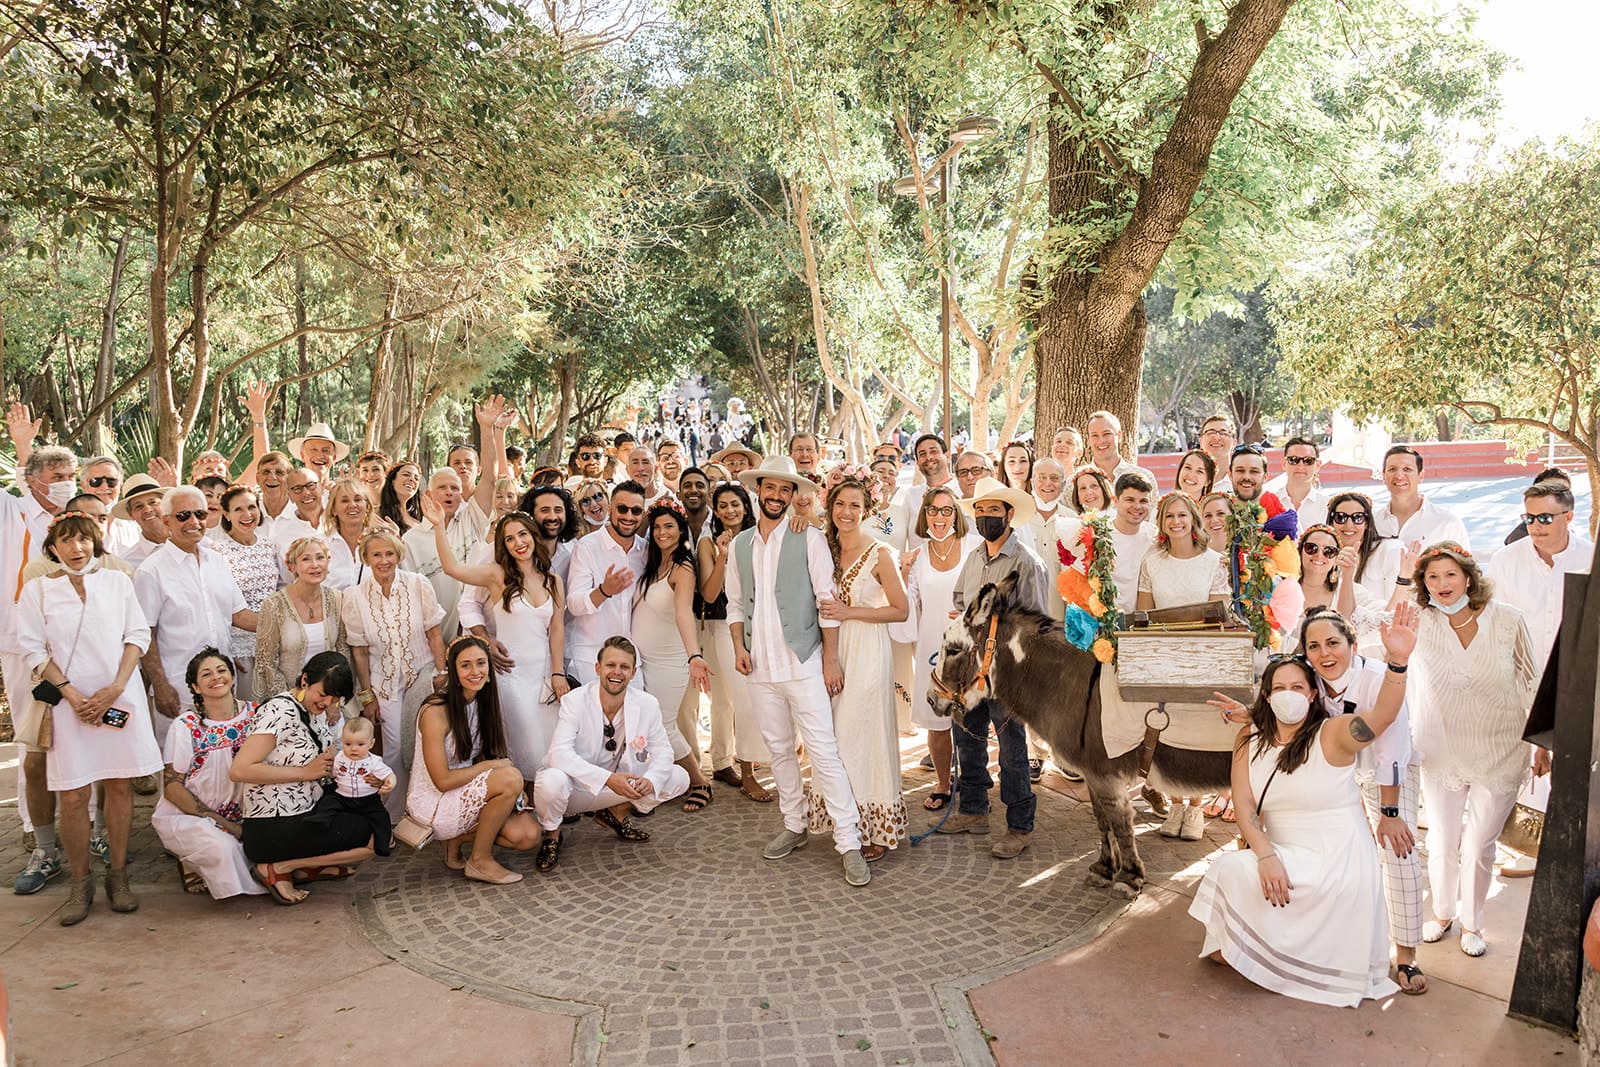 Bride, groom, mariachi band, and wedding guests stand during wedding parade